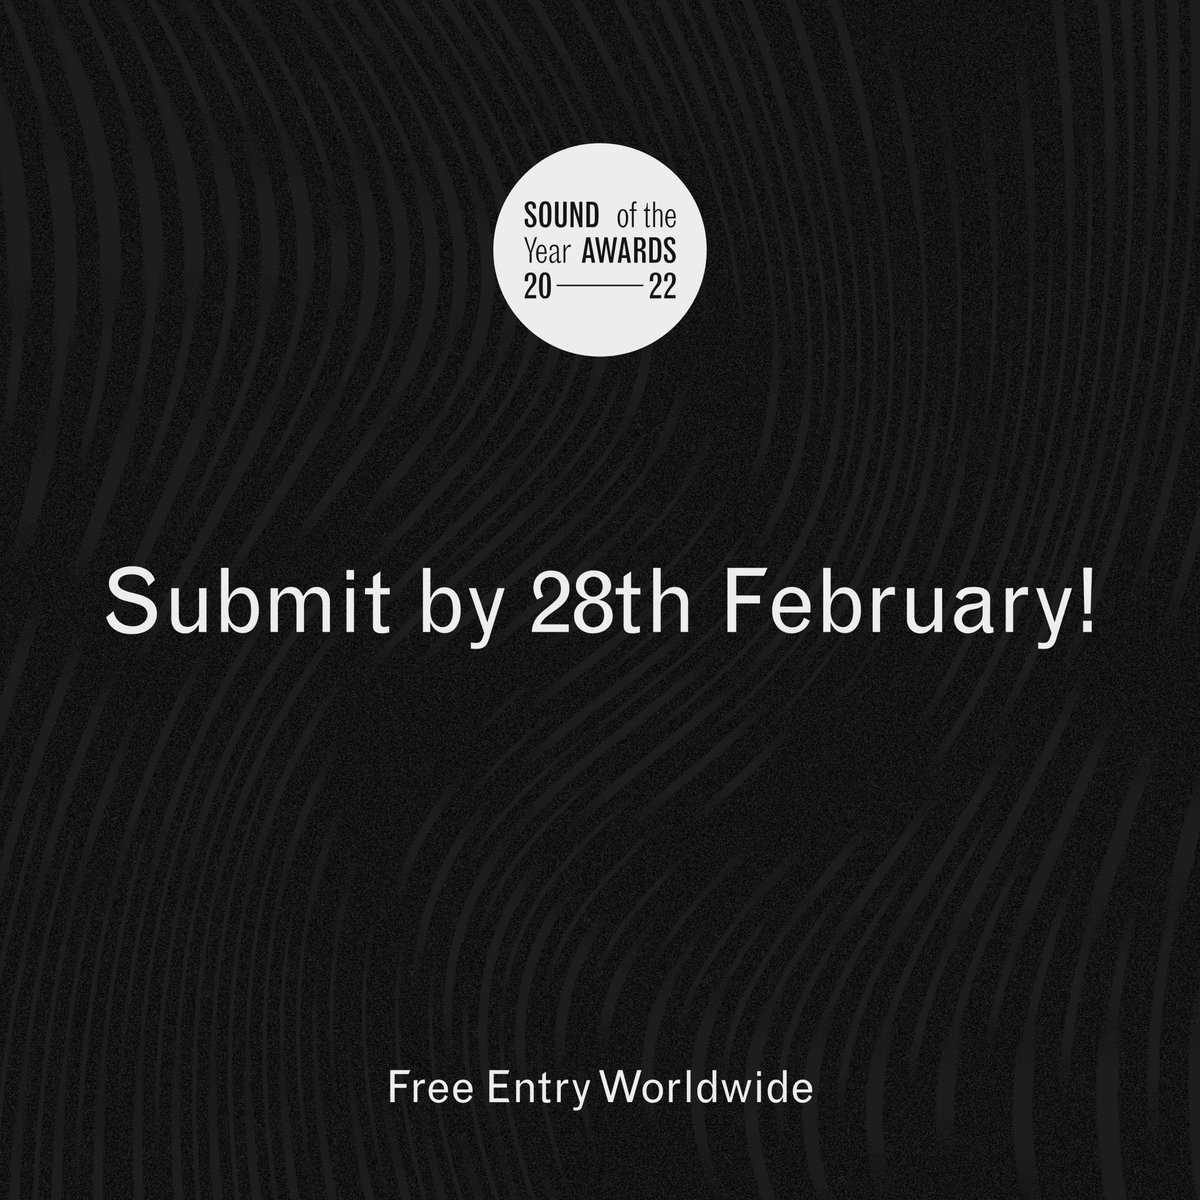 You have until the end of the month to enter the Sound of the Year Awards 2022! Submit now at soundoftheyearawards.com to be in with the chance of winning a pair of microphones from LOM.